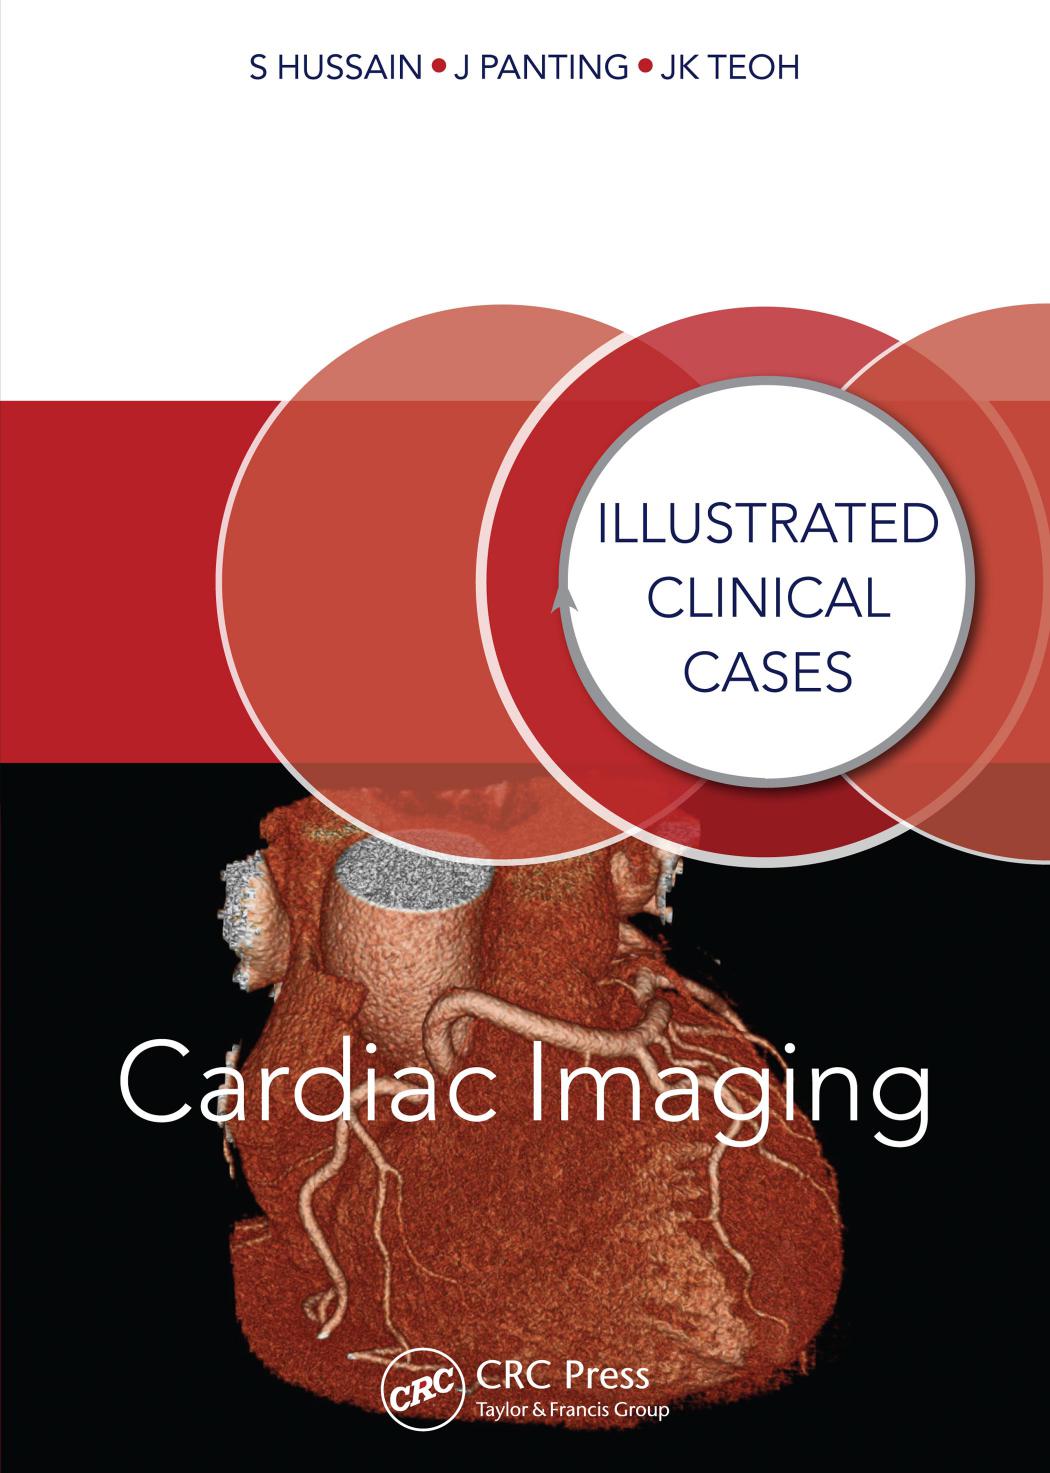 [Illustrated Clinical Cases] Hussain - Cardiac Imaging